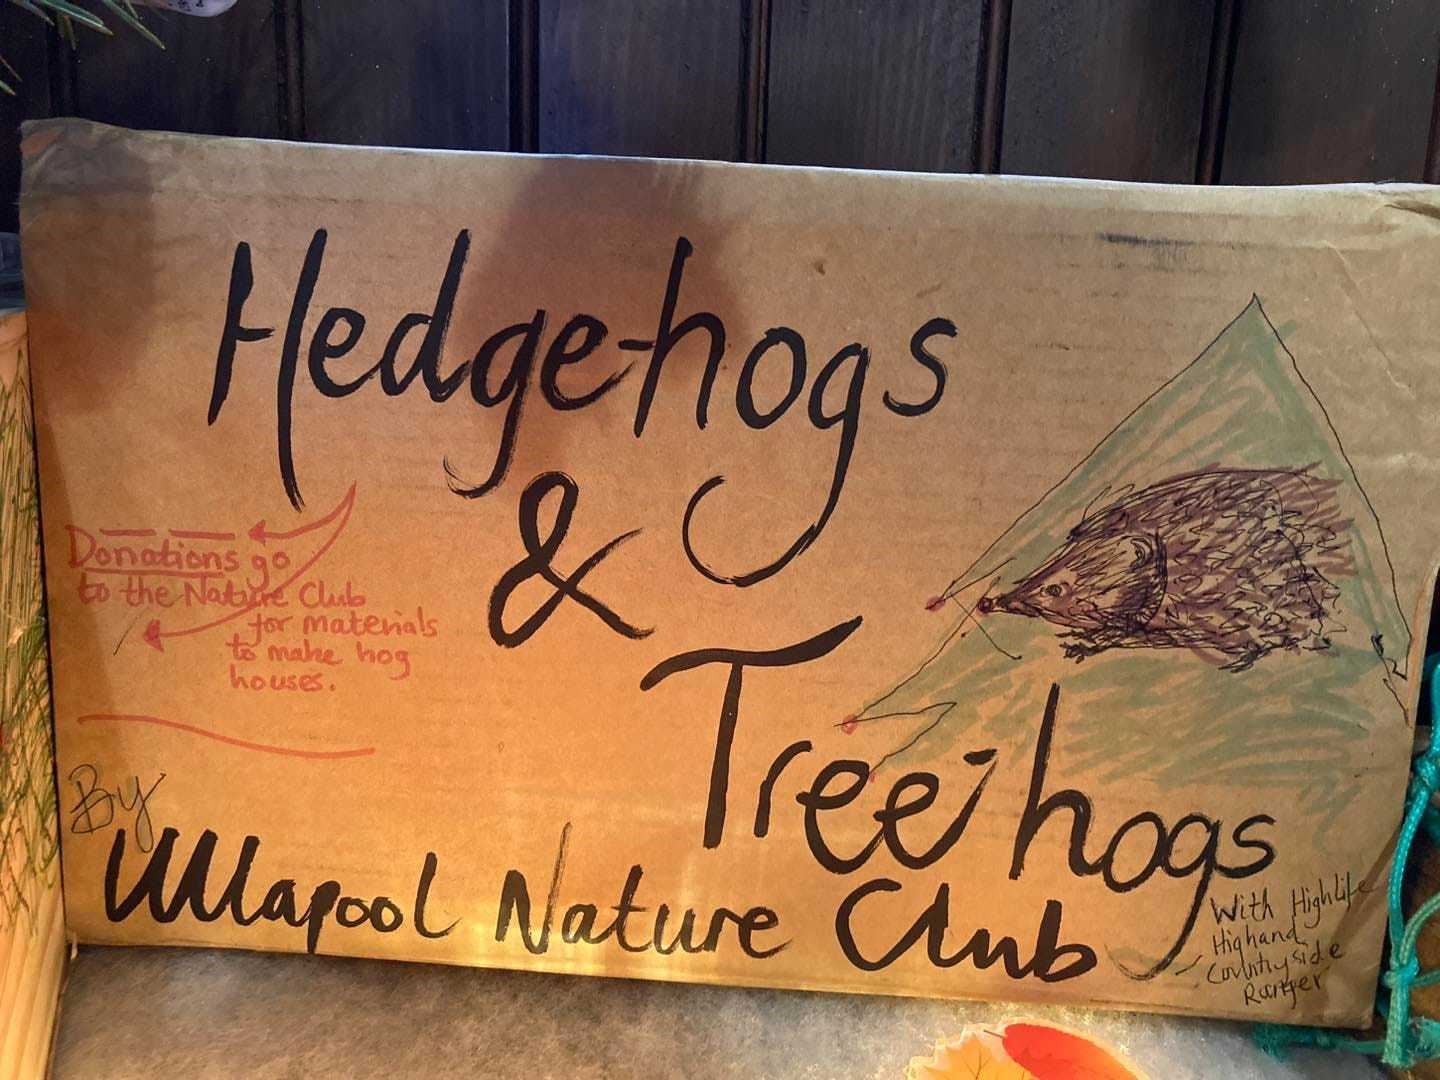 The Ullapool Nature Club's Hedgehogs and Treehogs project. Picture: High Life Highland.